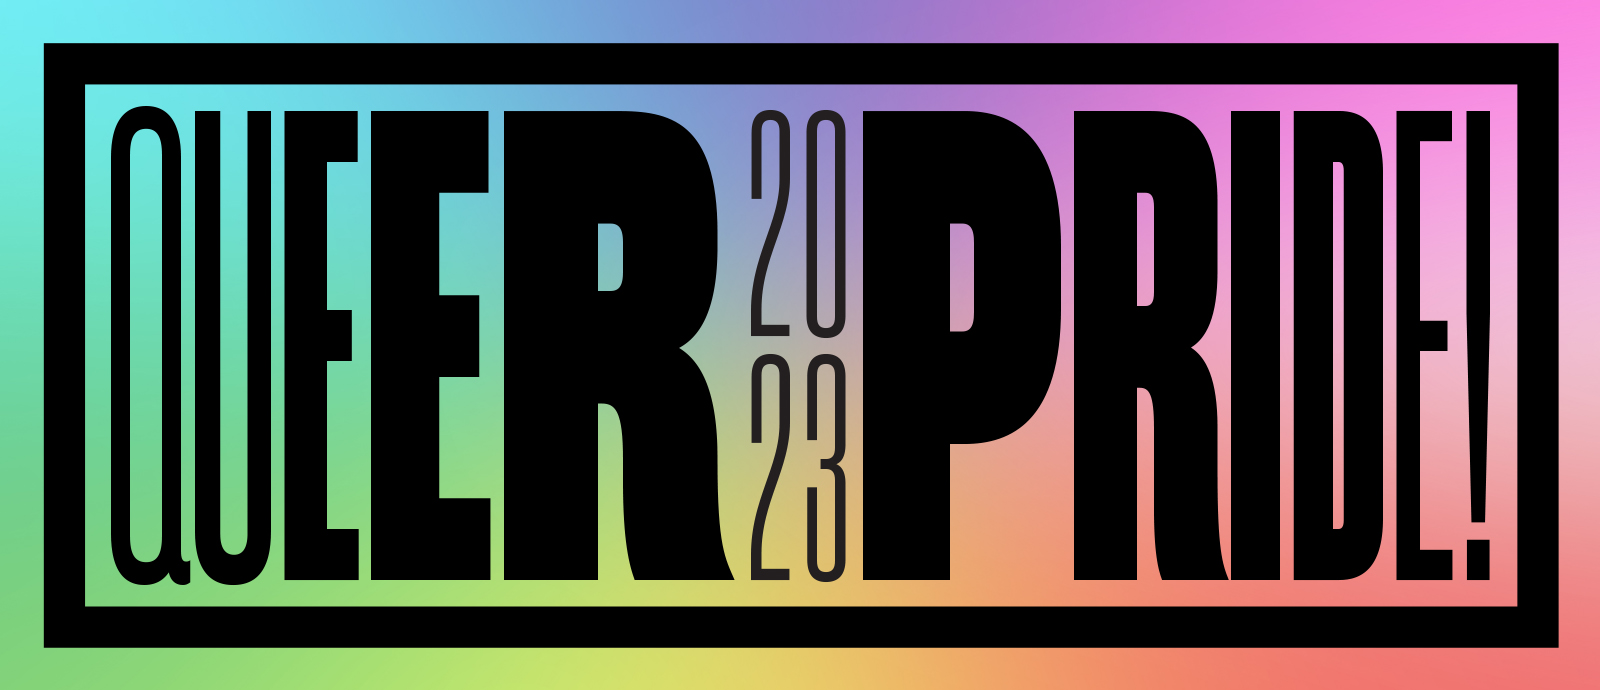 Image of a graphic that reads, QUEER 2023 PRIDE! With black block letters ranging in boldness. The background is a rainbow gradient, and the text is surrounded by a black border.